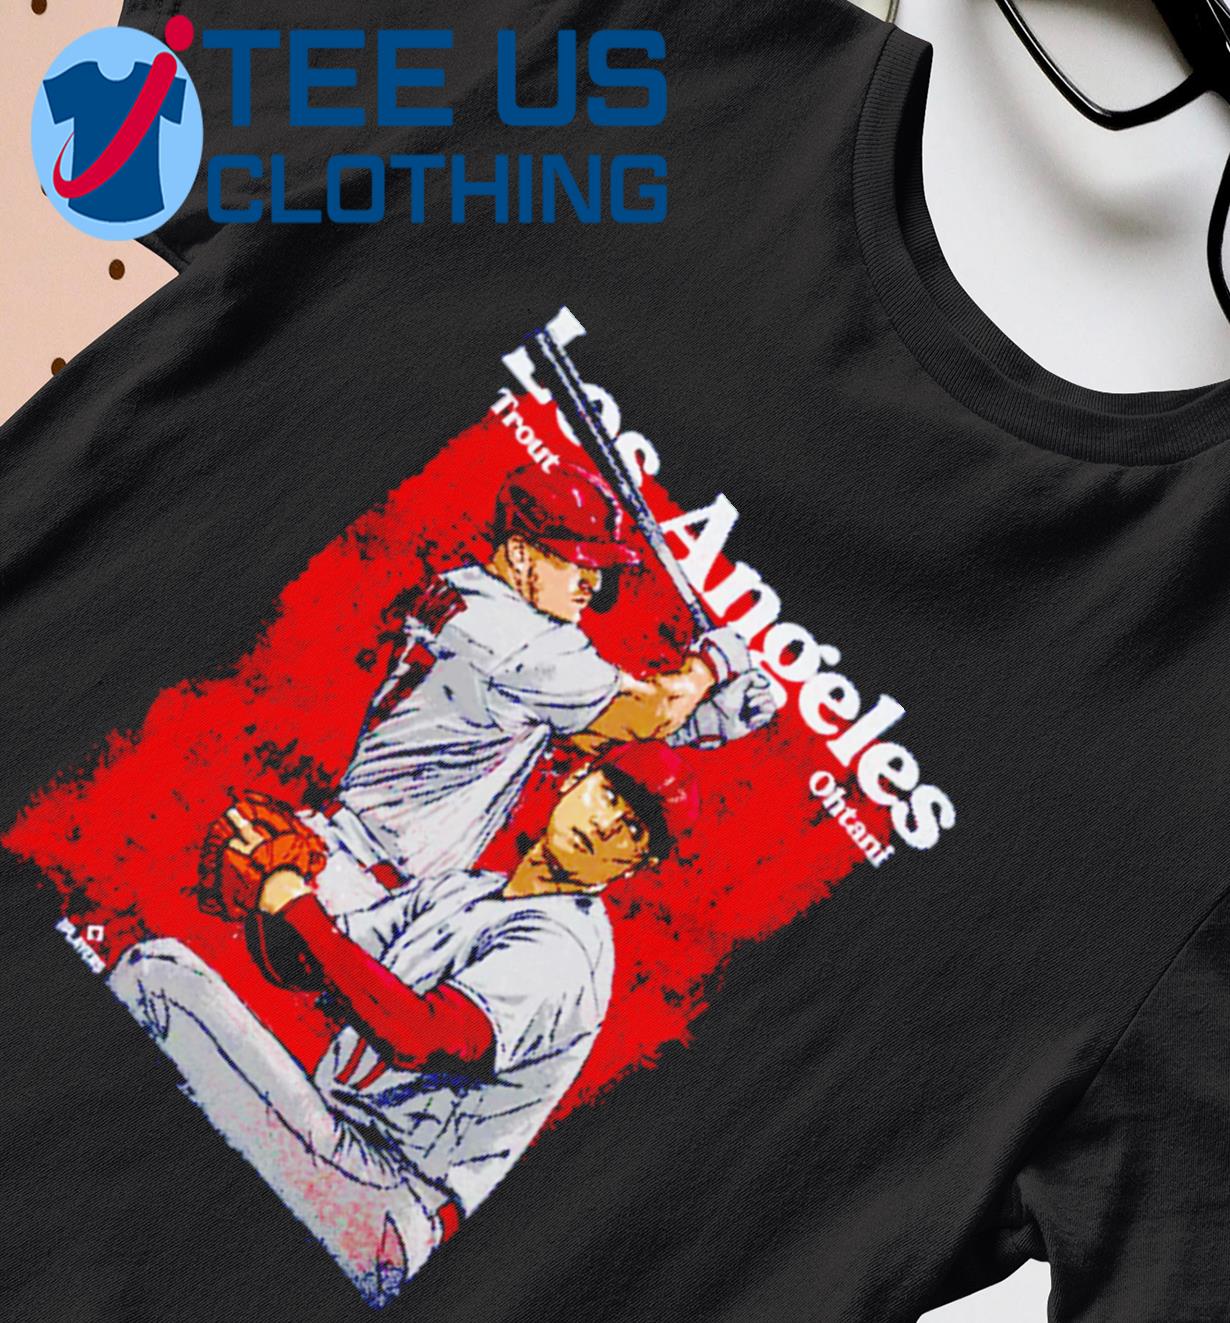 Trout and Ohtani Los Angeles Angels Baseball shirt, hoodie, sweater, long  sleeve and tank top